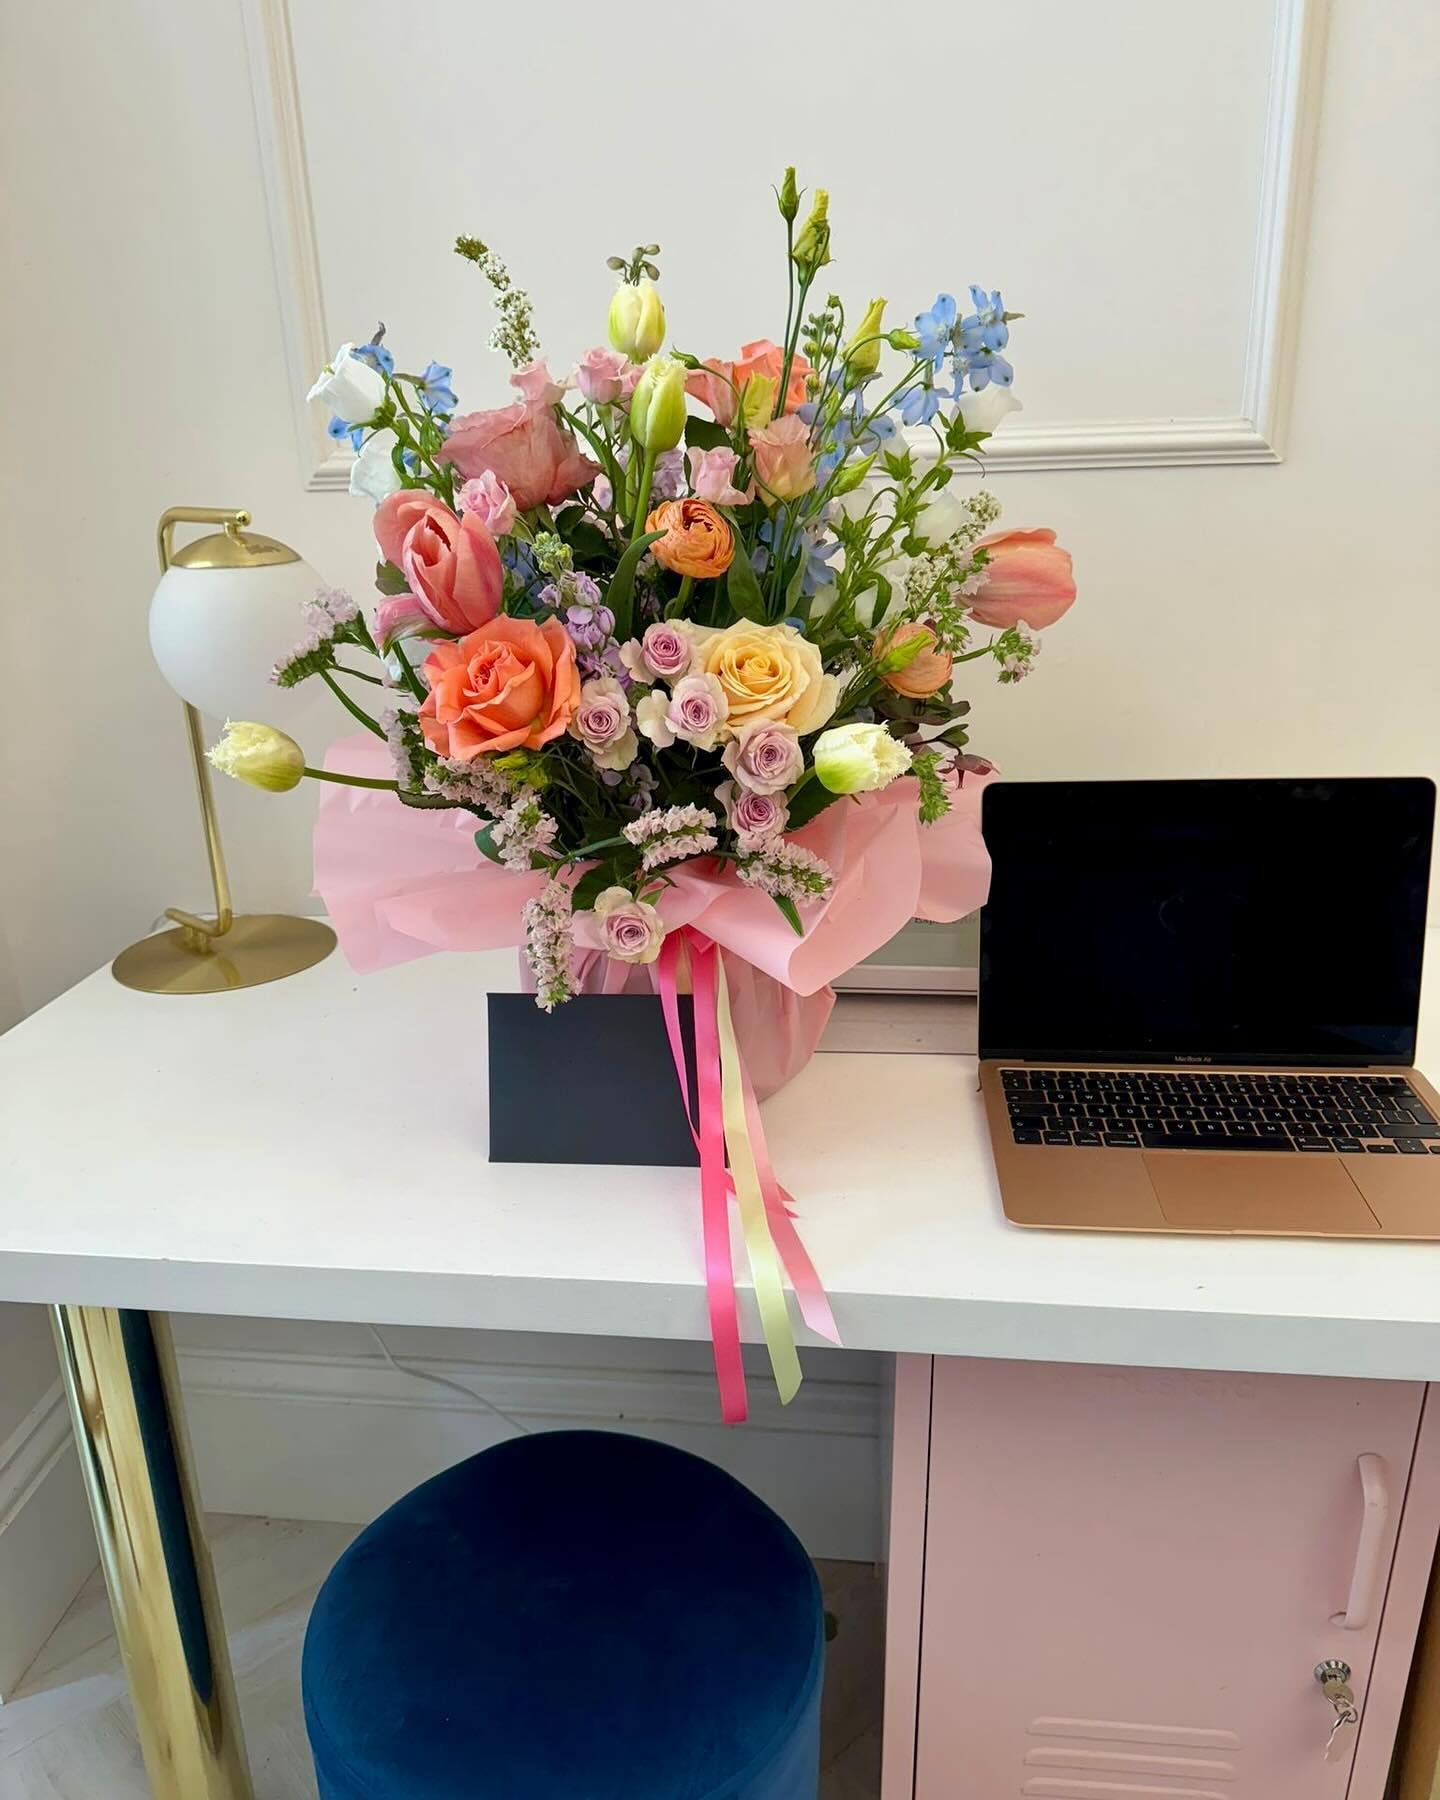 Work desk goals! 

Gorgeous florals dressing our office space before heading out on delivery!

#florals #flowerslovers #flowers🌸 #flowersmakemehappy #flowerlover #flowerlove #tulips #flowerstalking #flowermagic #flowerpower #flowerarrangement #birth